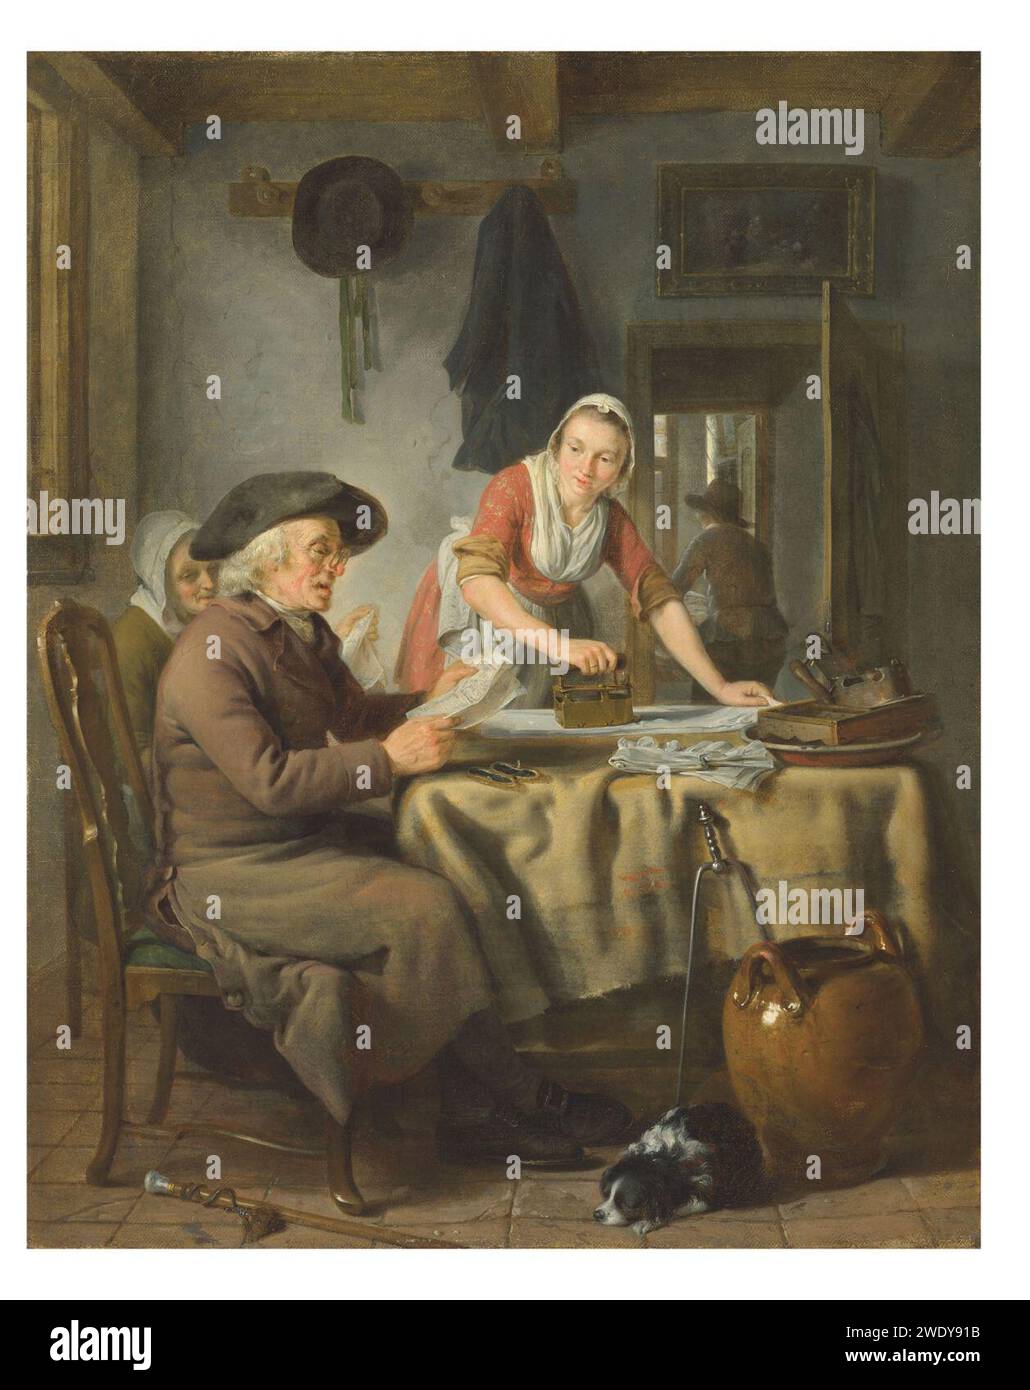 Adriaan de lelie an old woman frying pancakes in a kitchen with a maid073420). Stock Photo